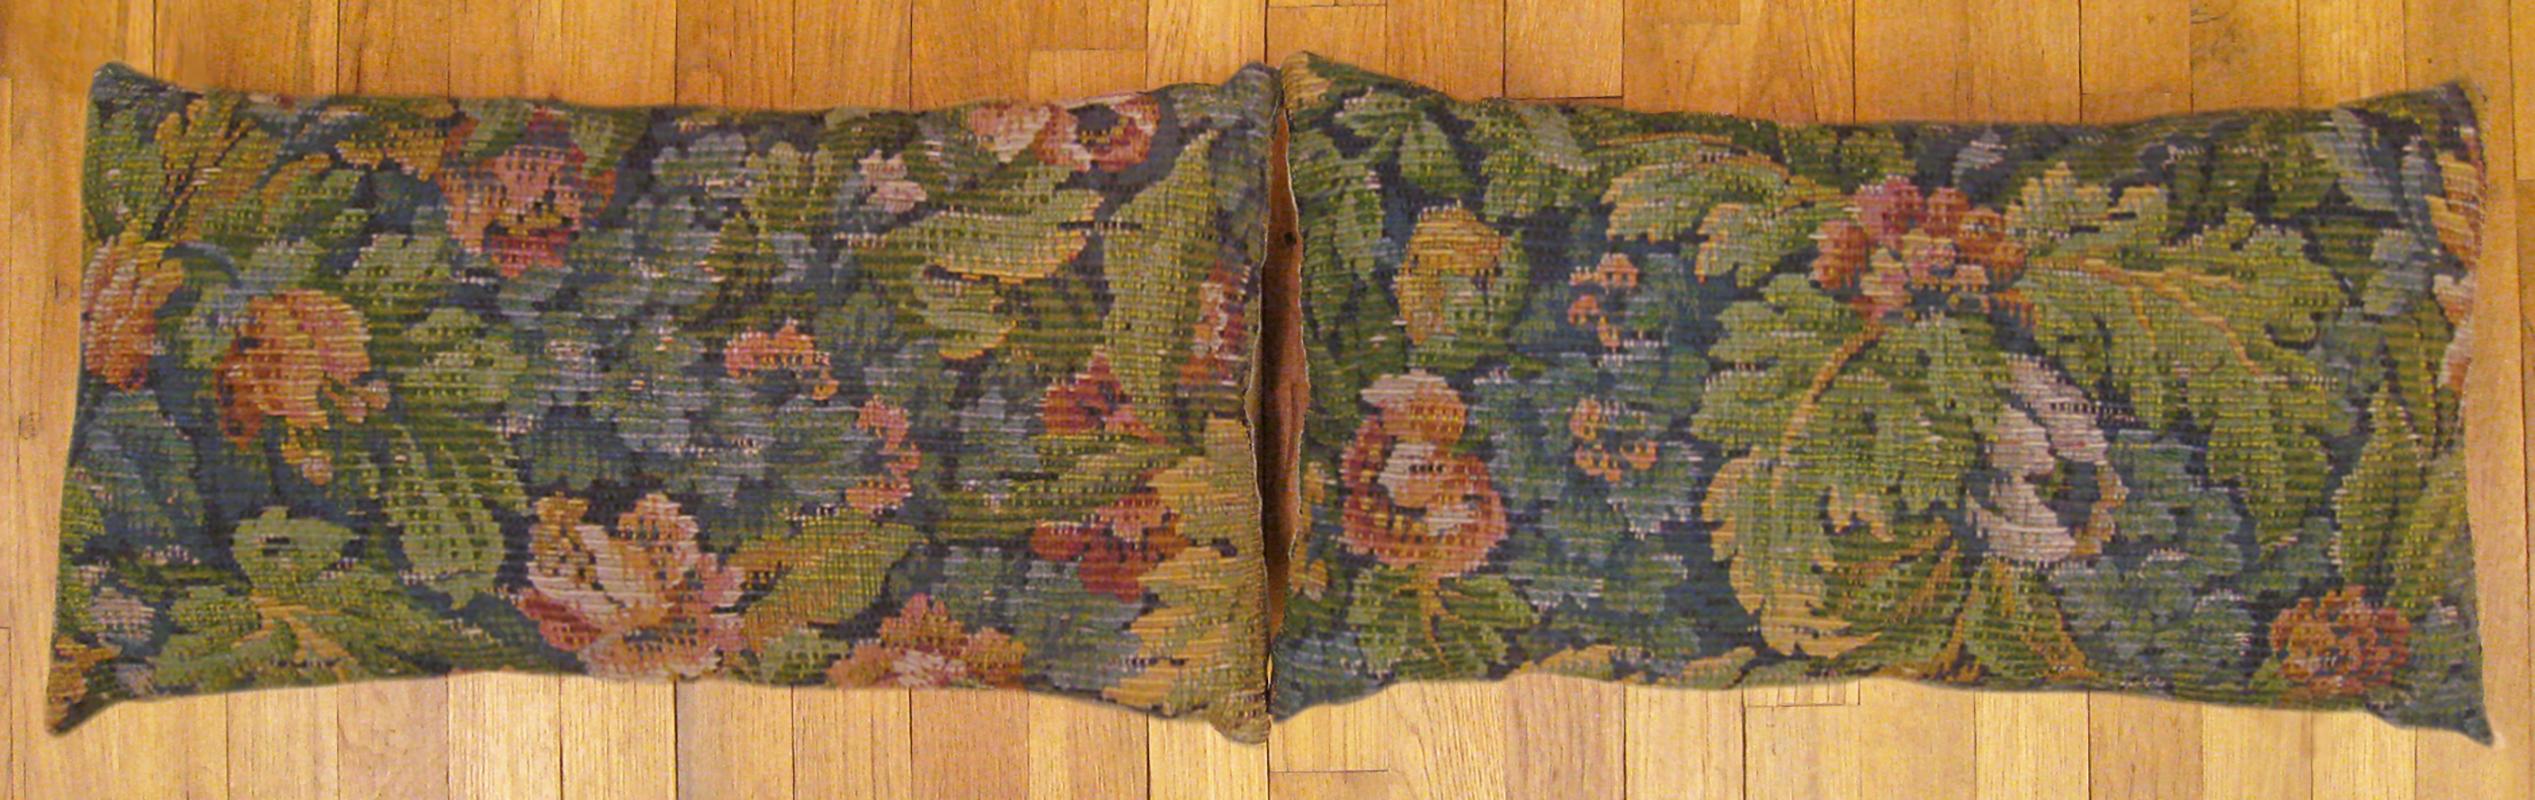 A pair of antique jacquard tapestry pillows ; size 1'0” x 2'0” each.

An antique decorative pillows with floral elements allover a blue green central field, size 1'0